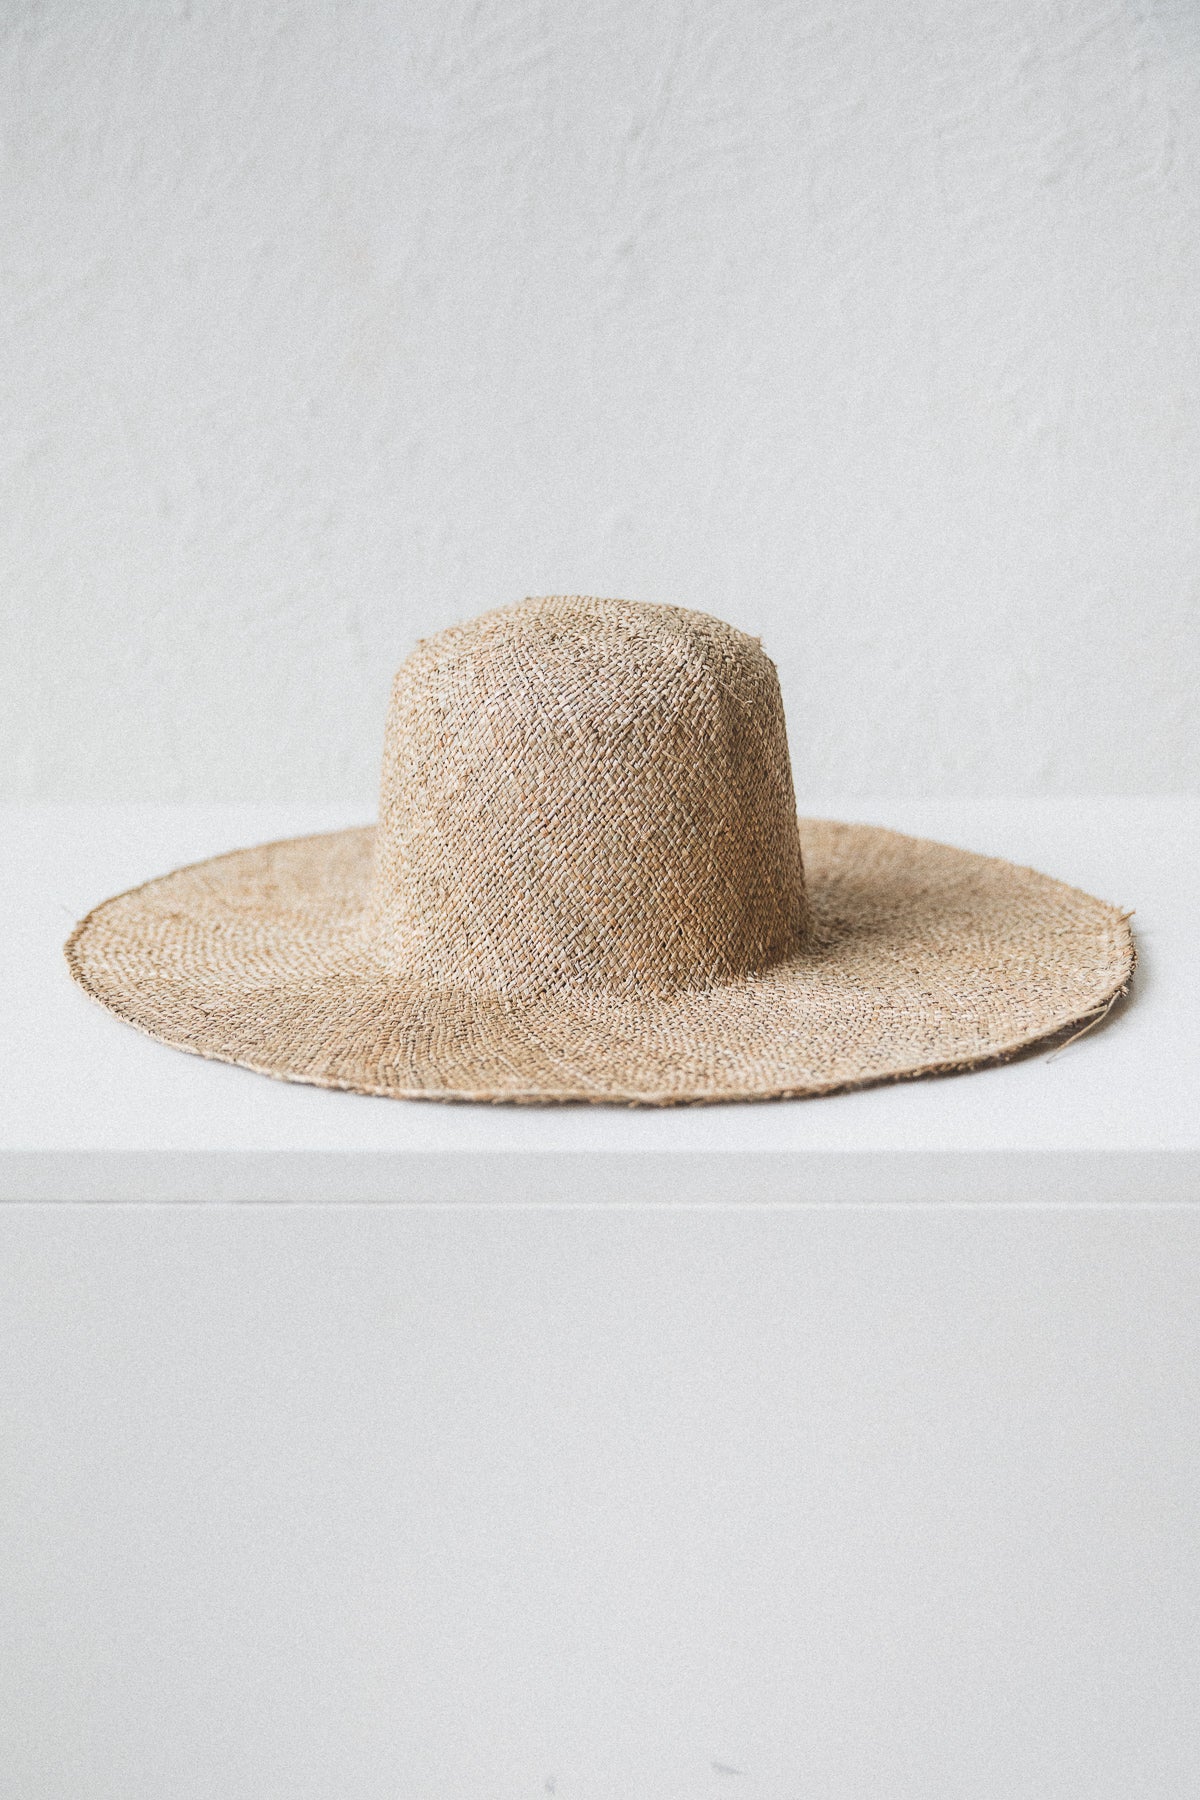 OPTIMO PACKABLE HAT IN SEAGRASS STRAW